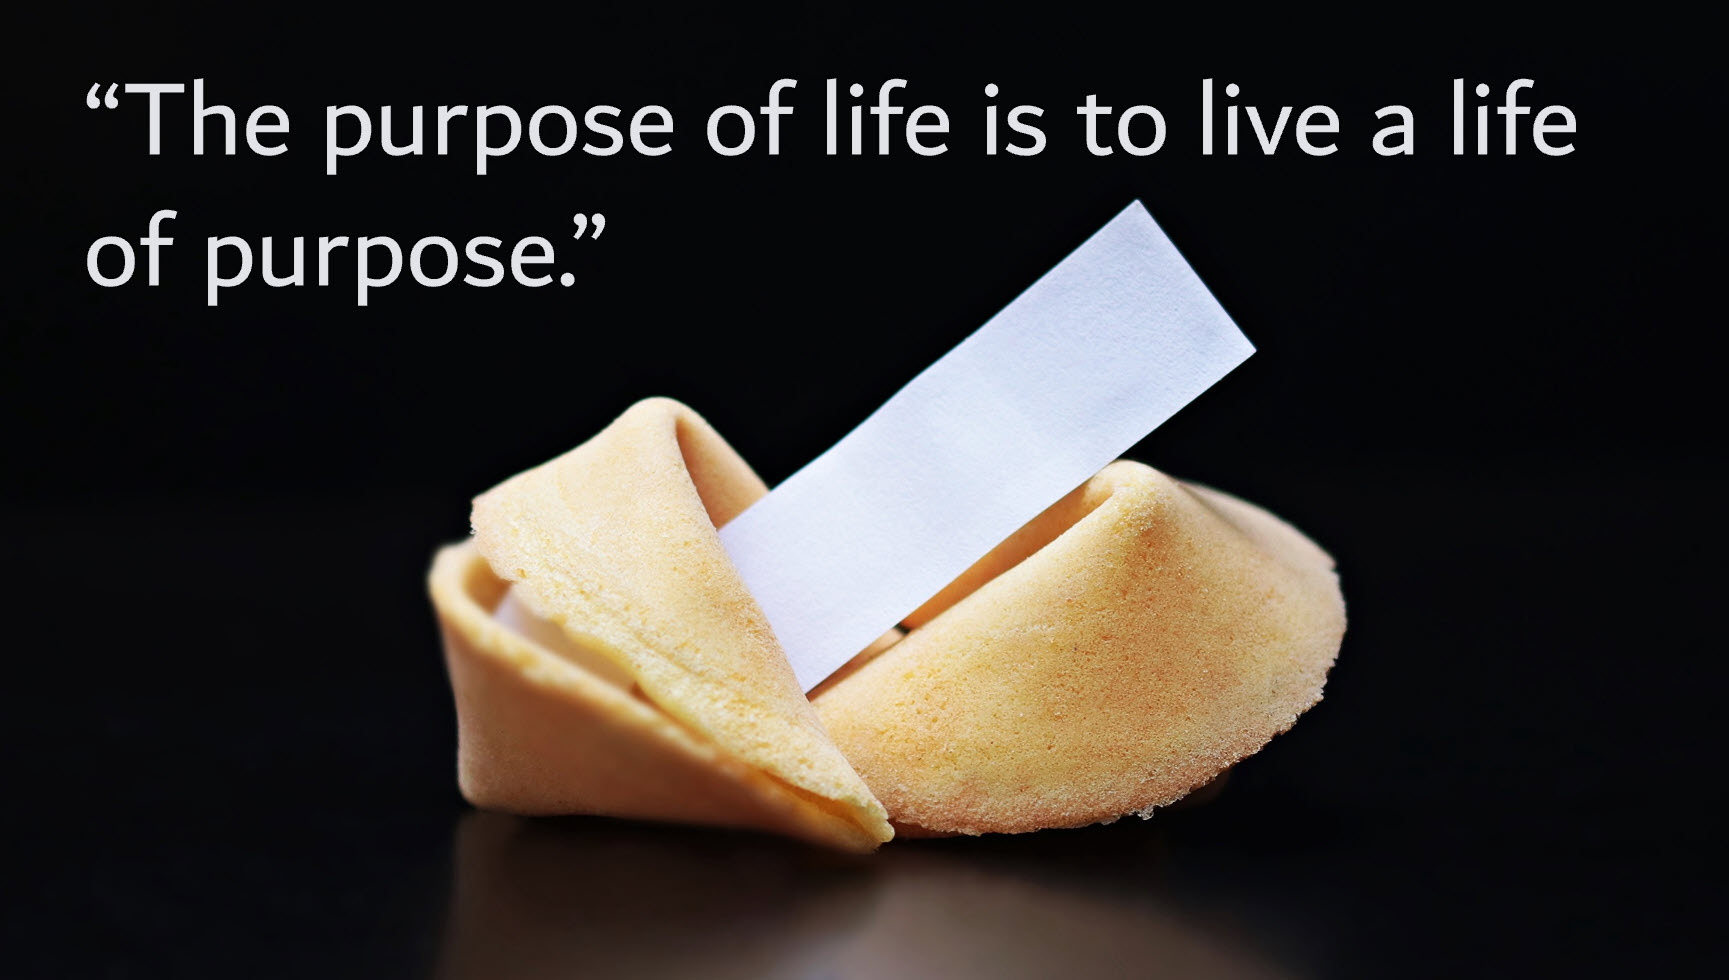 the purpose of live is to lead a life of purpose